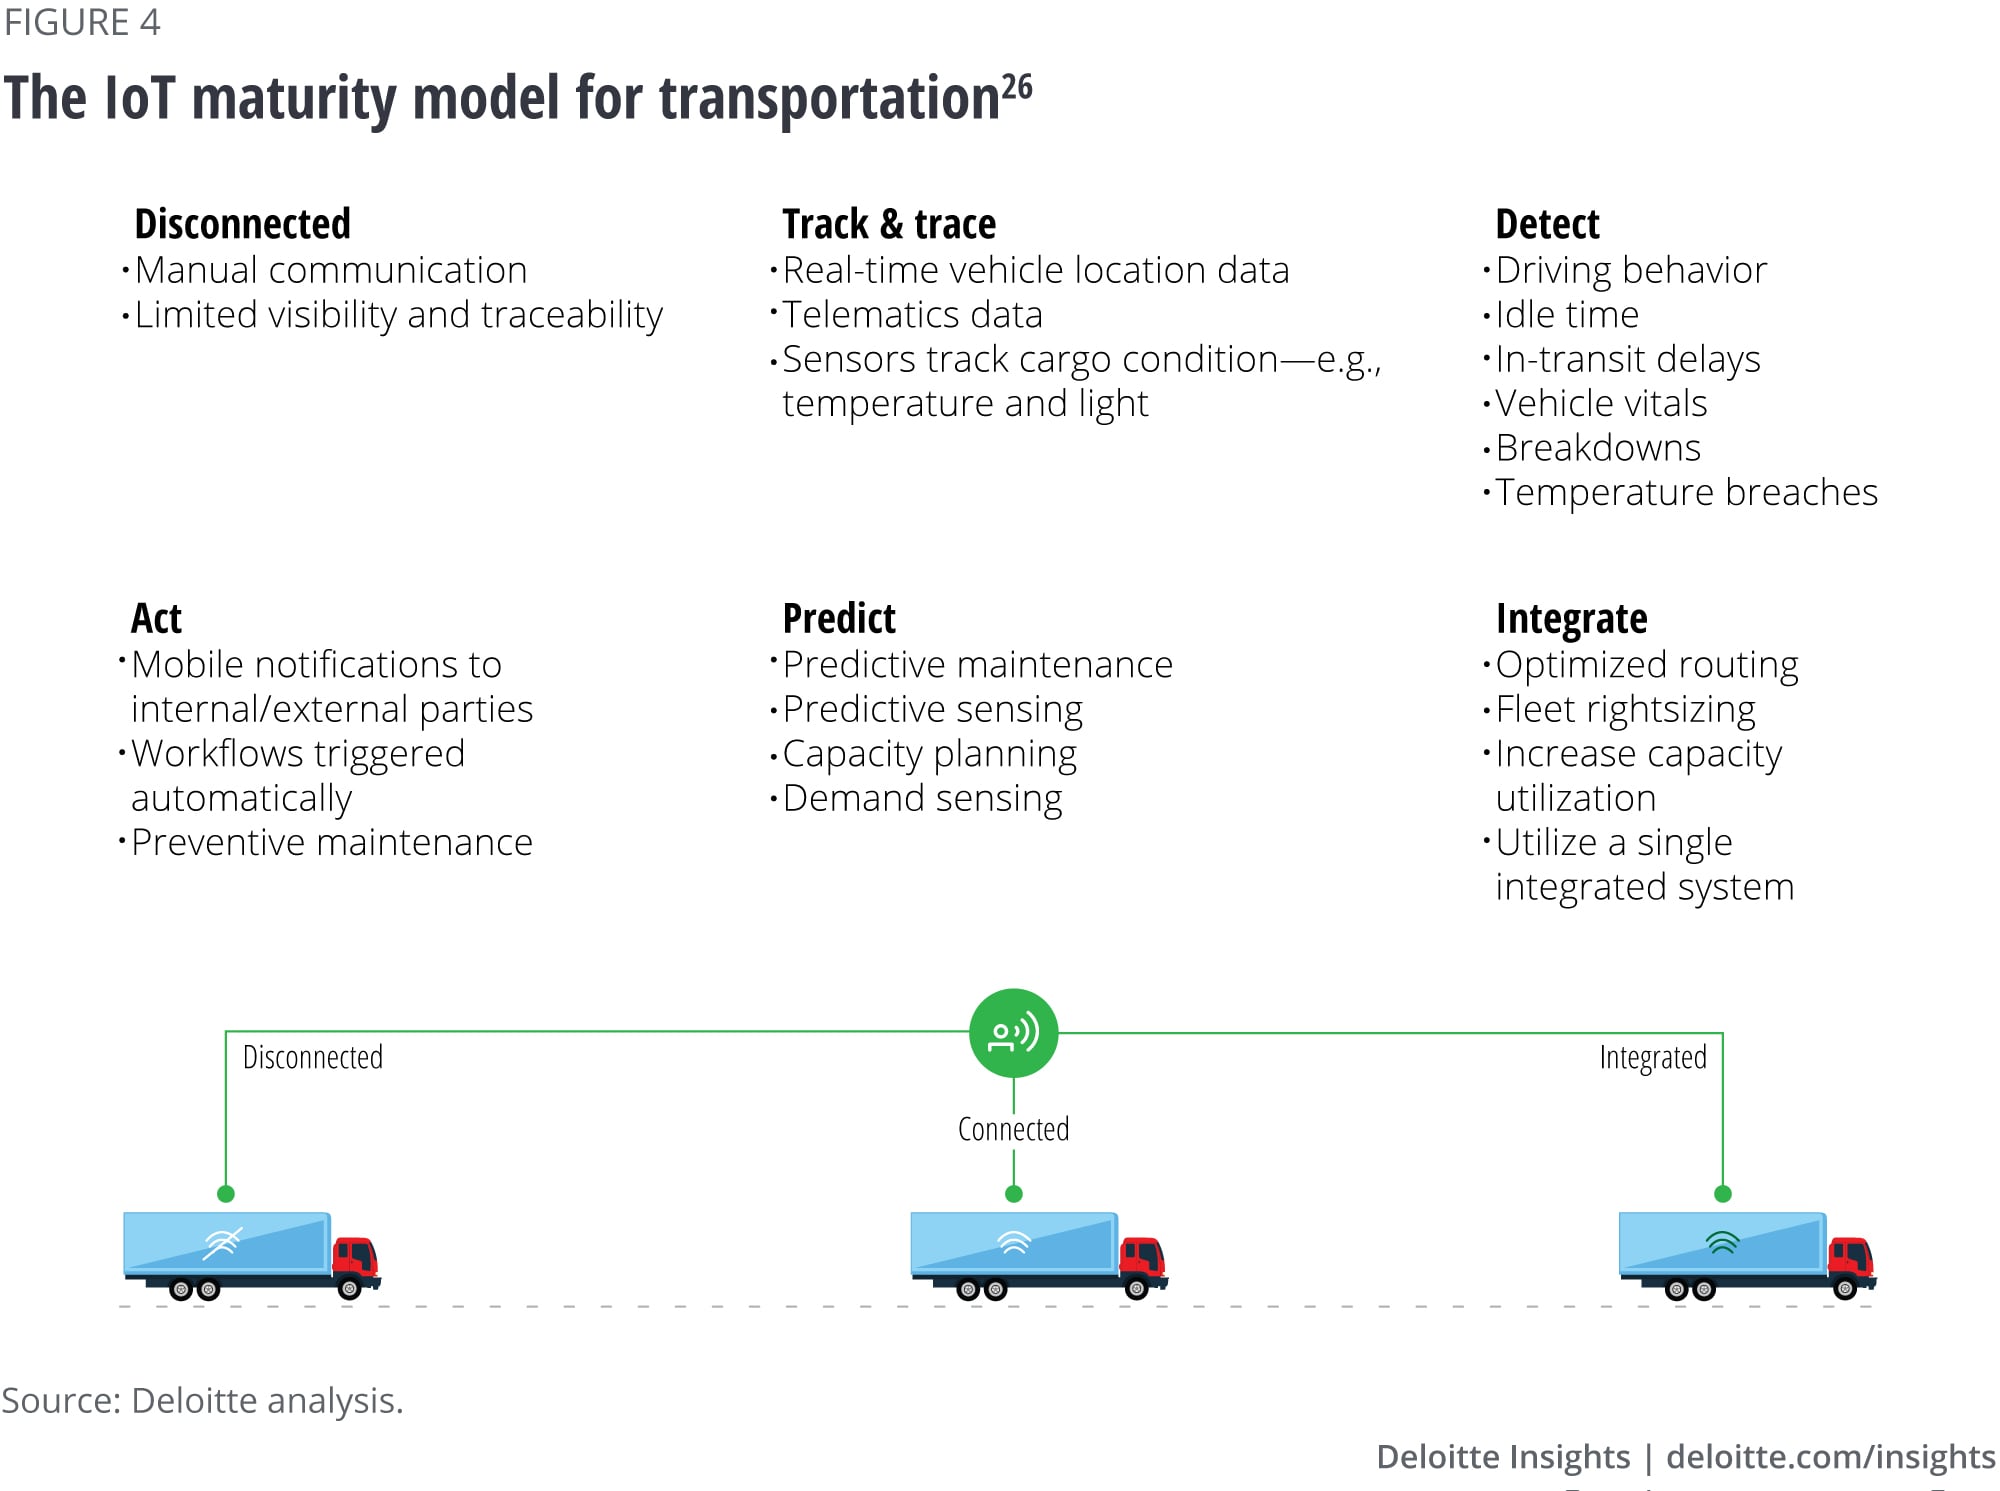 The IoT maturity model for transportation